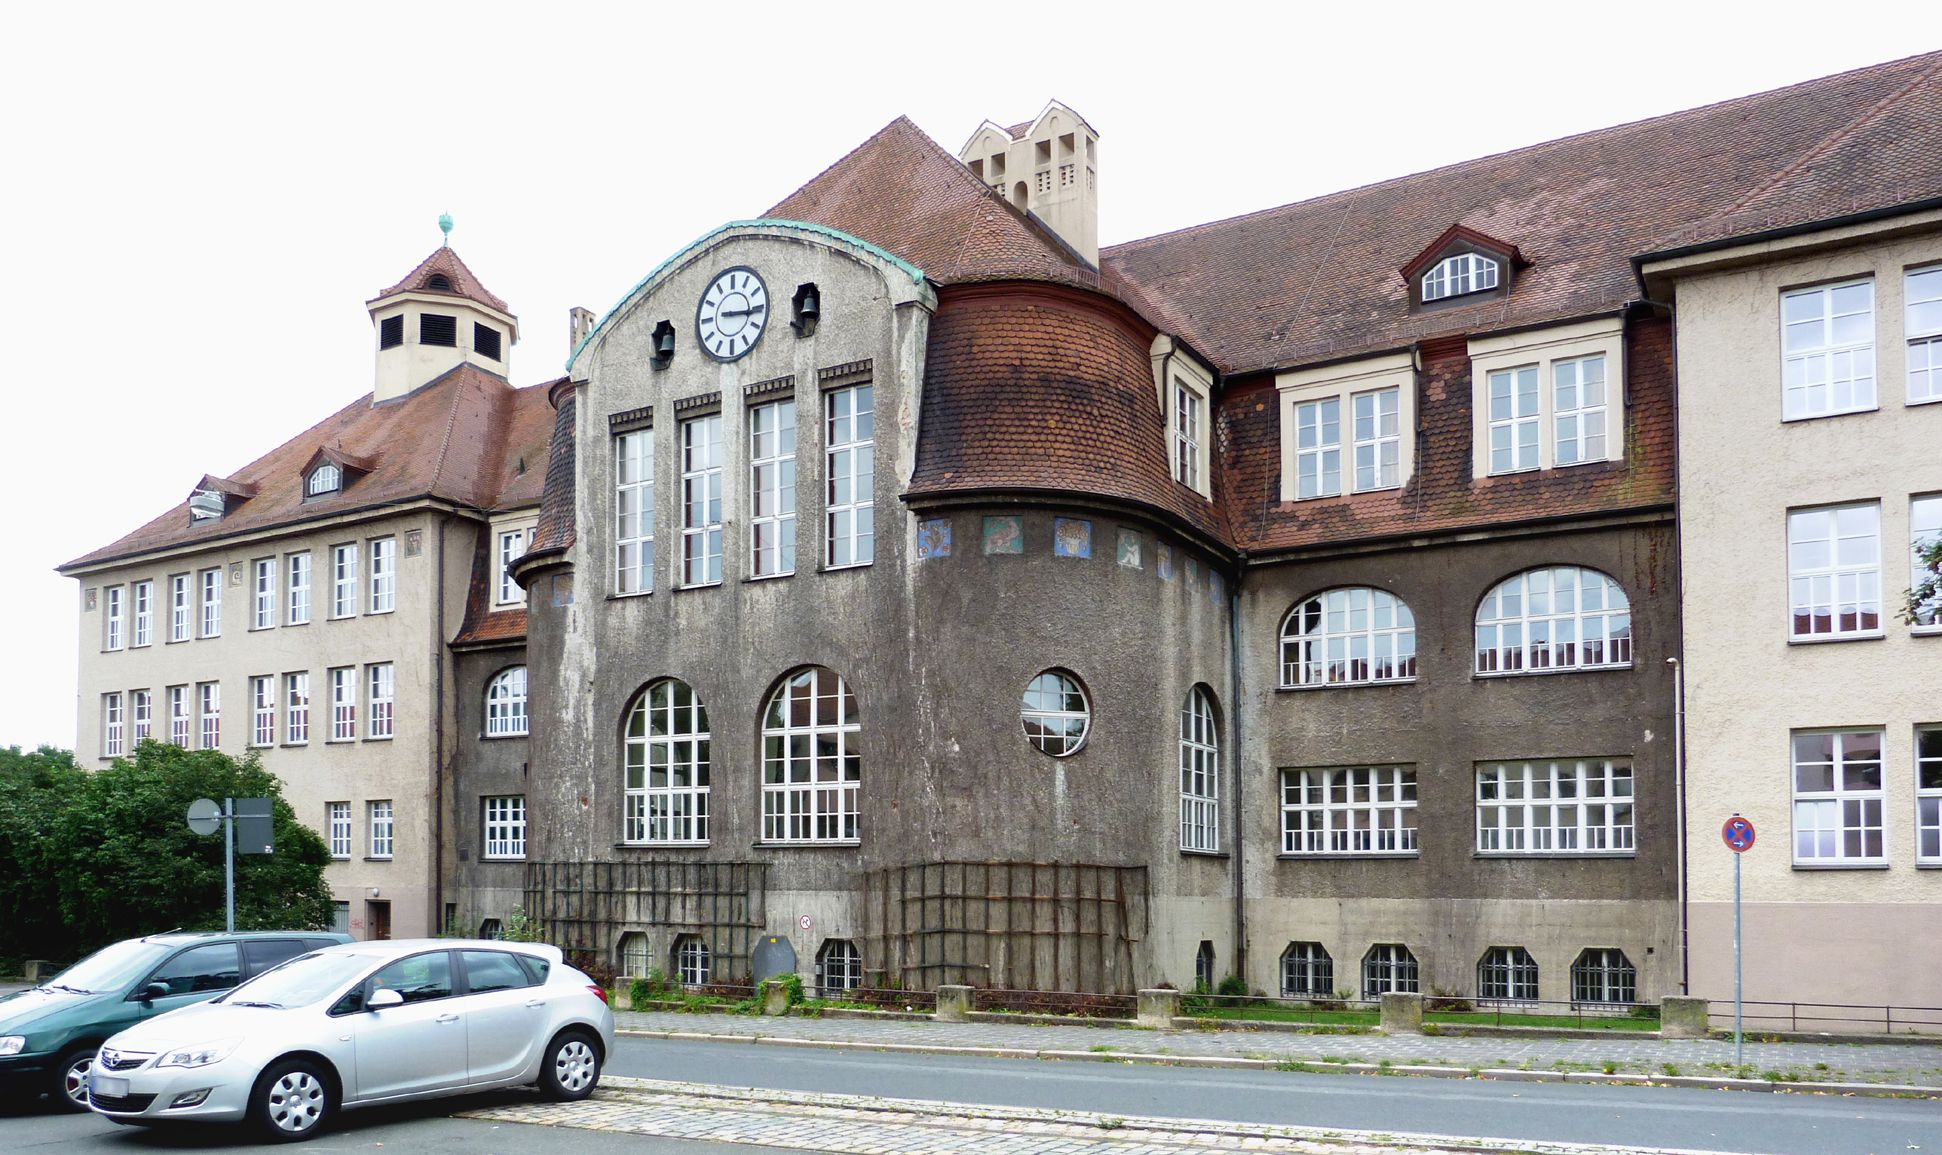 Georg-Paul-Amberger-School View from the west